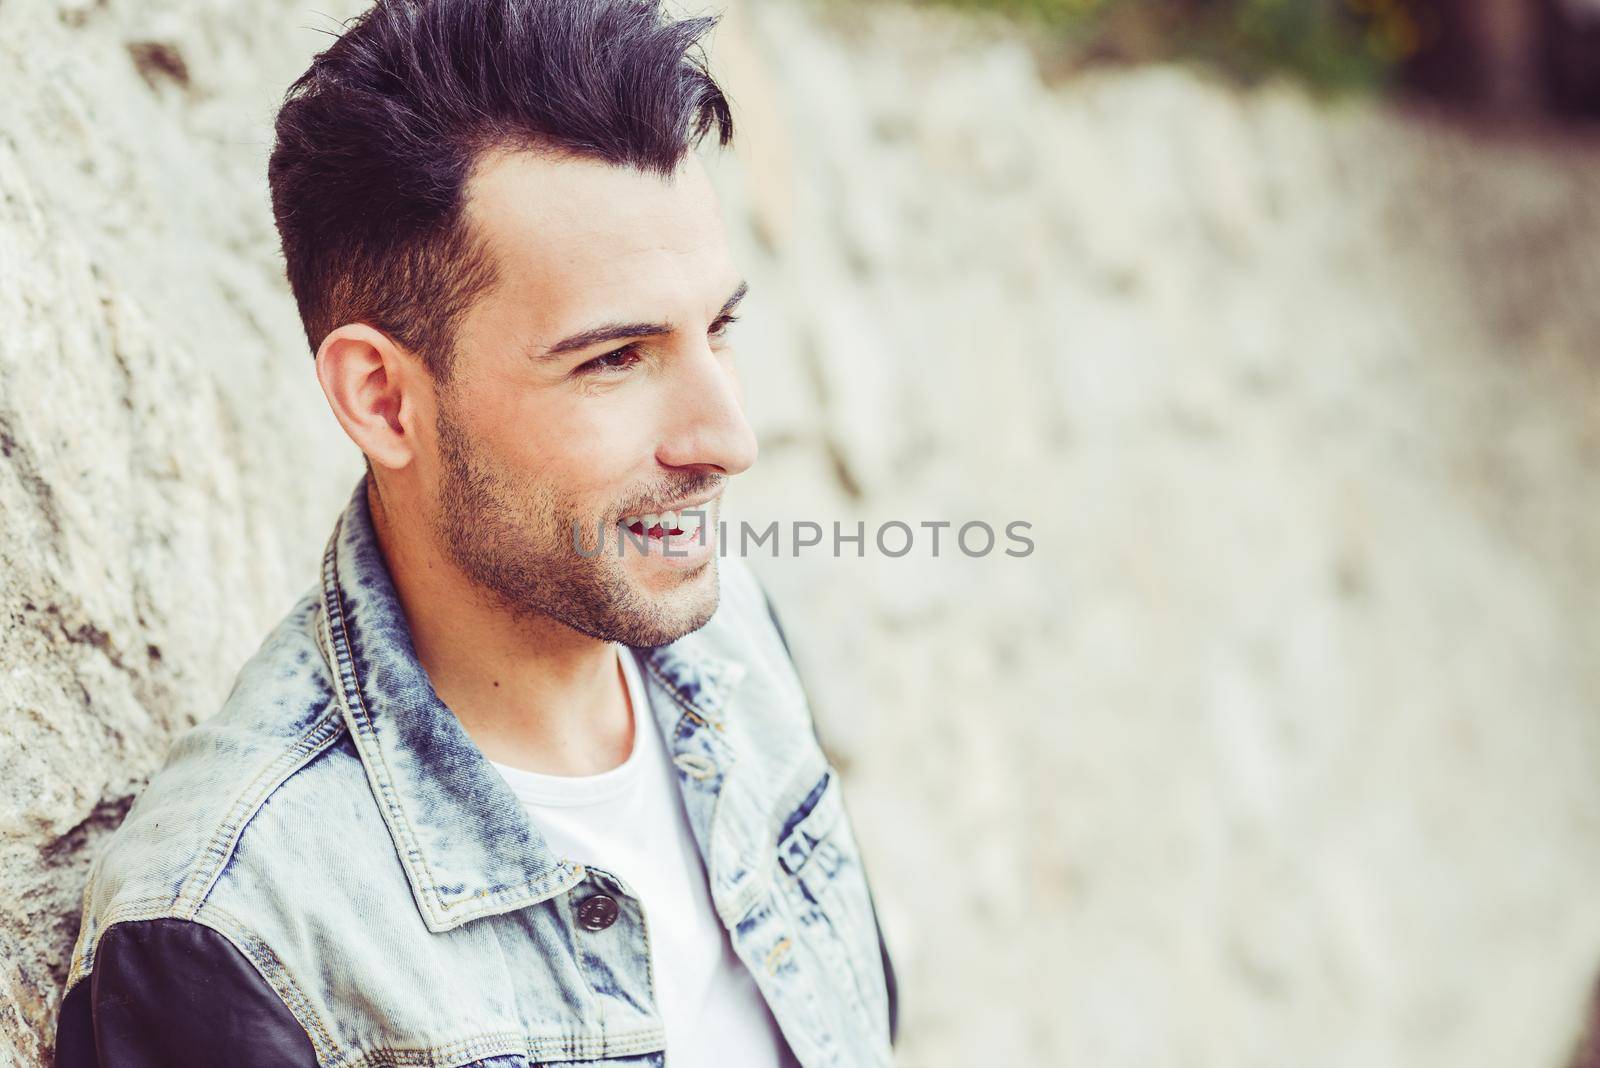 Portrait of a young handsome man, model of fashion, with modern hairstyle in urban background, smiling